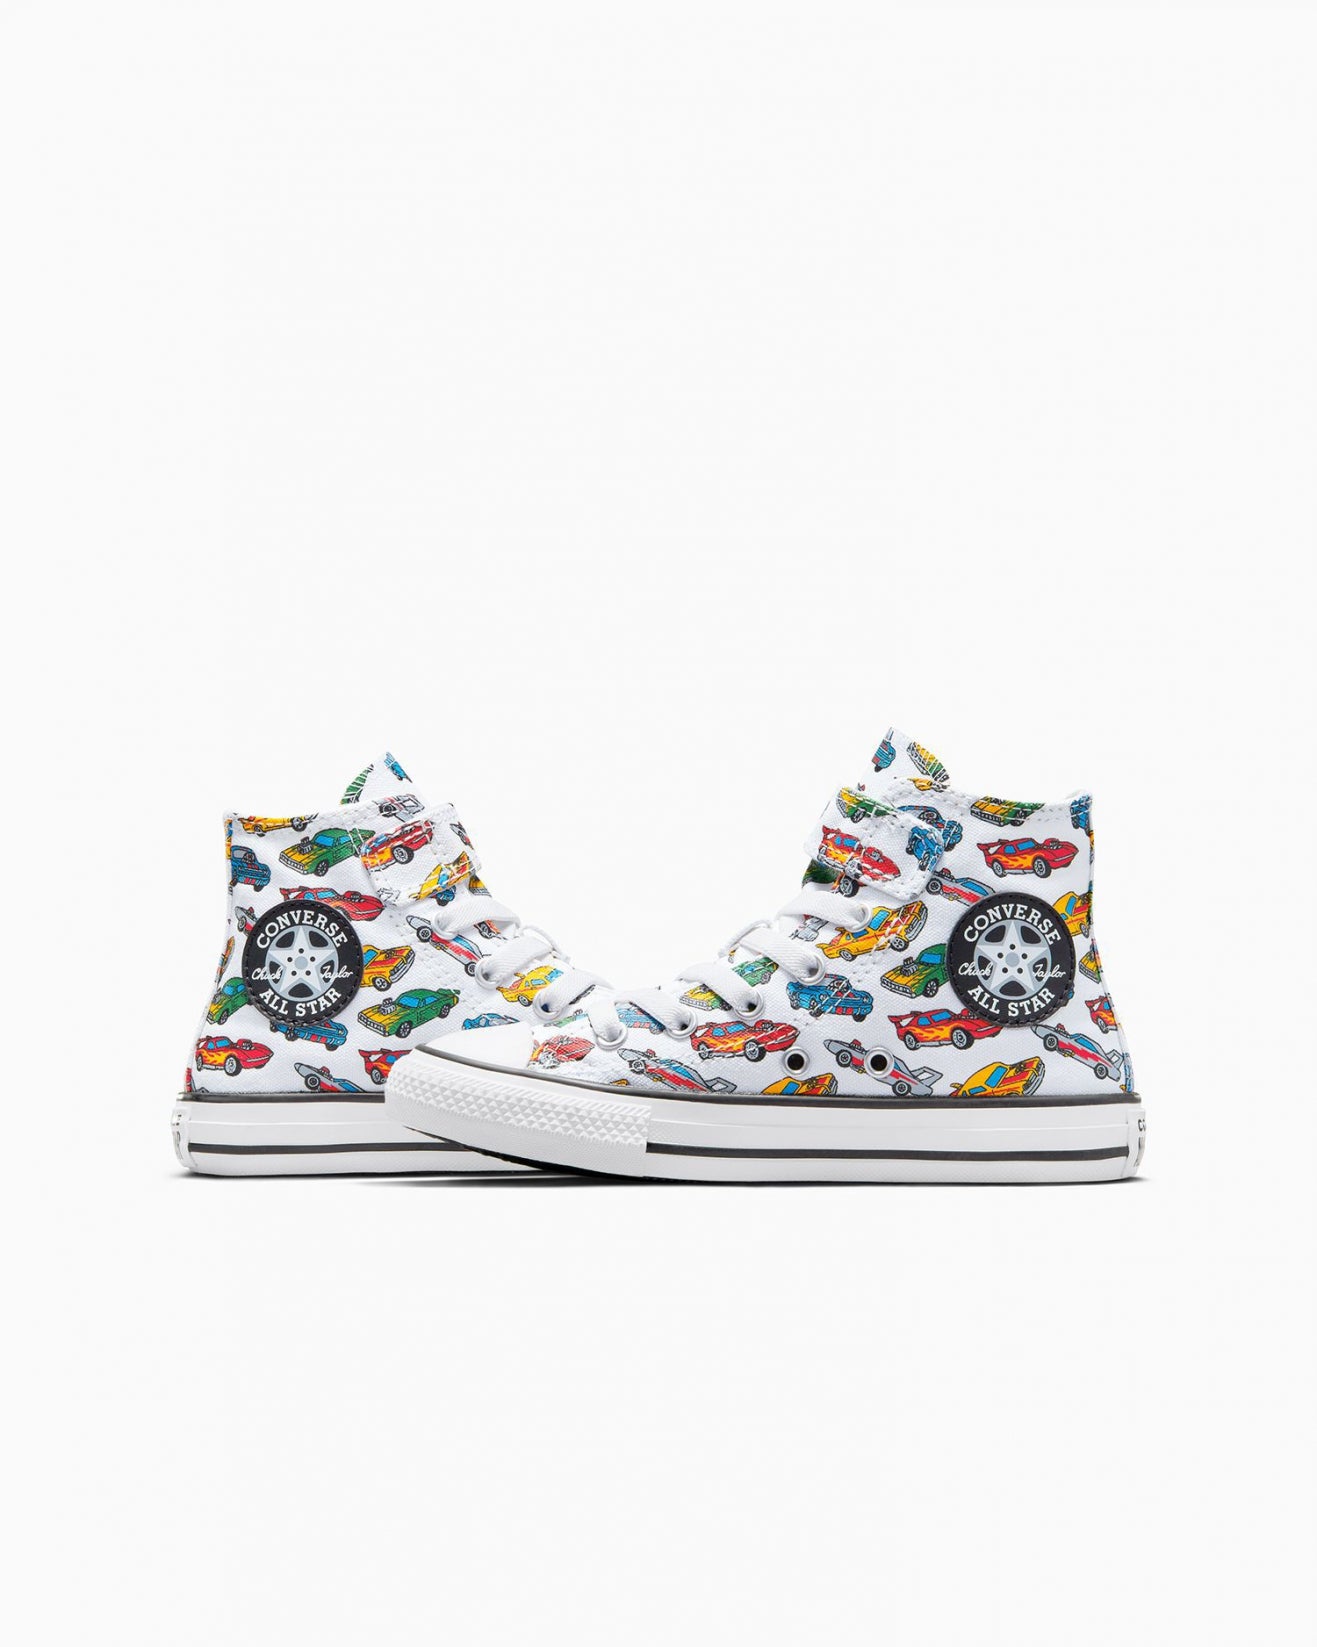 - Converse Kids All Star Cars White/Yellow/Red Hi Top - (A04743) - CRS - R1L1